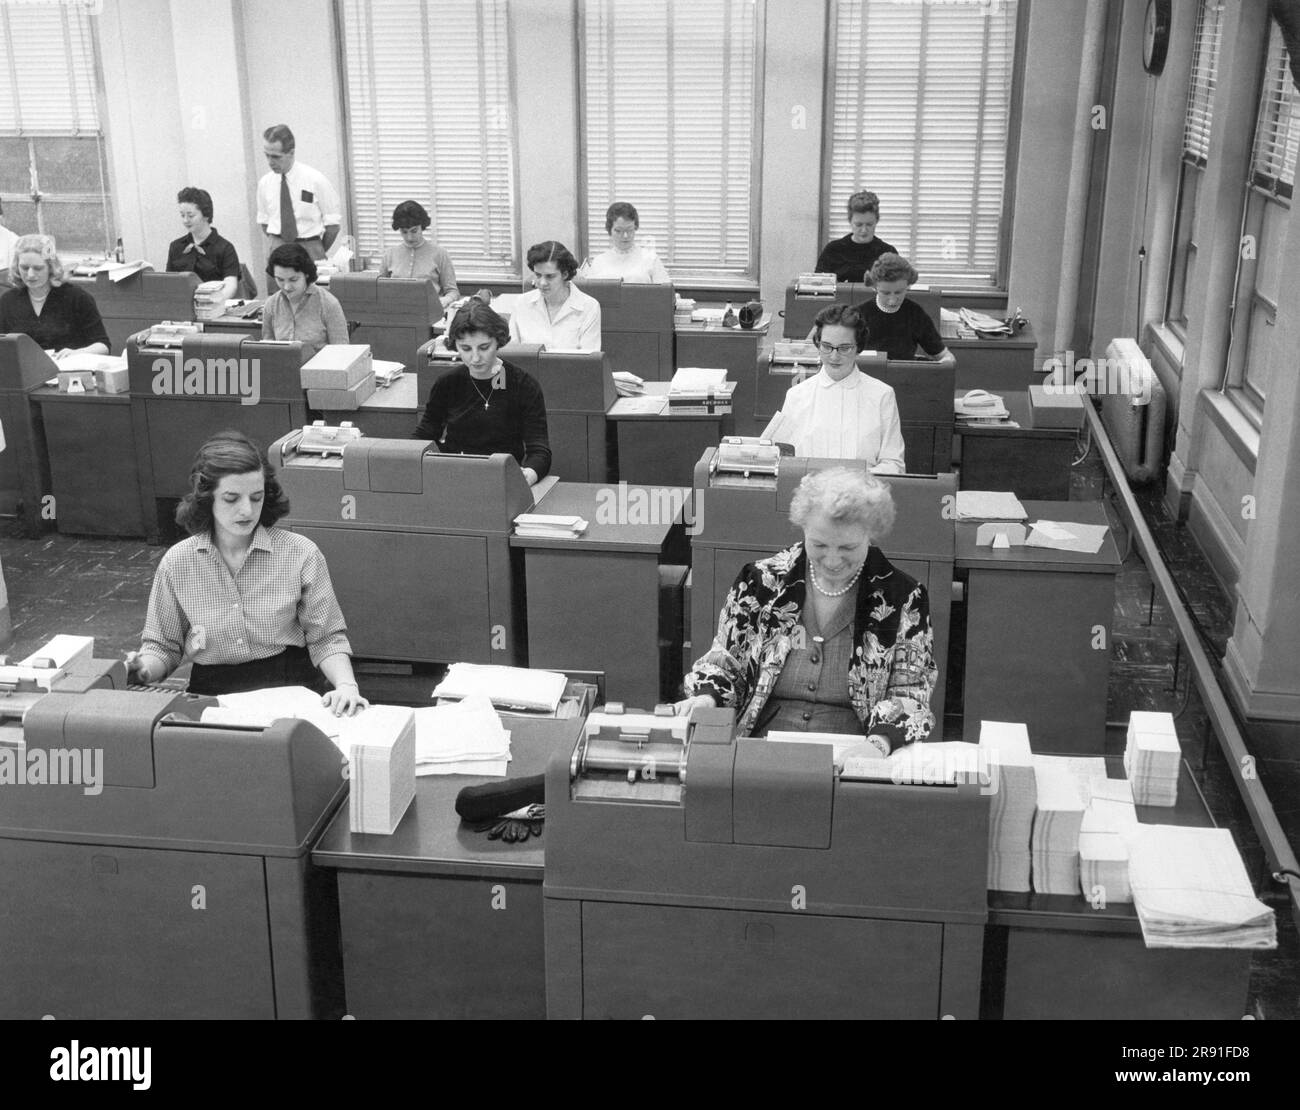 Cleveland, Ohio: January 22, 1958 Women office workers entering data ...